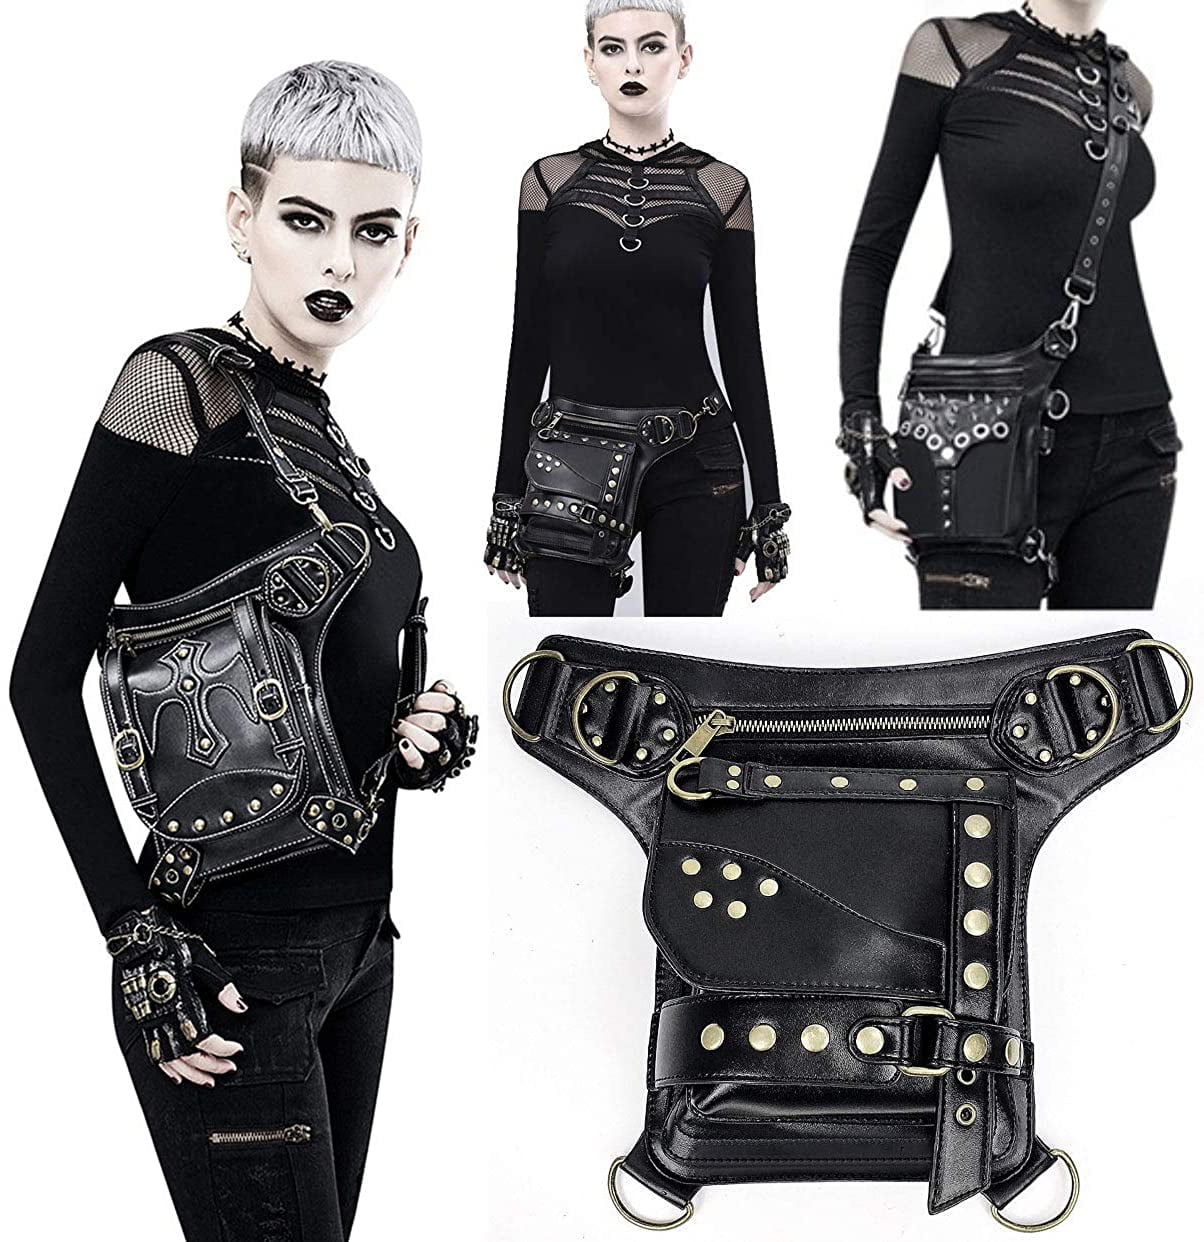 Steampunk Waist Bag Fanny Pack Fashion Gothic Leather Shoulder Crossbody Messenger Bags Thigh Leg Hip Holster Purse Travel Pouch Hiking Sport Chain Bags for Women Men 